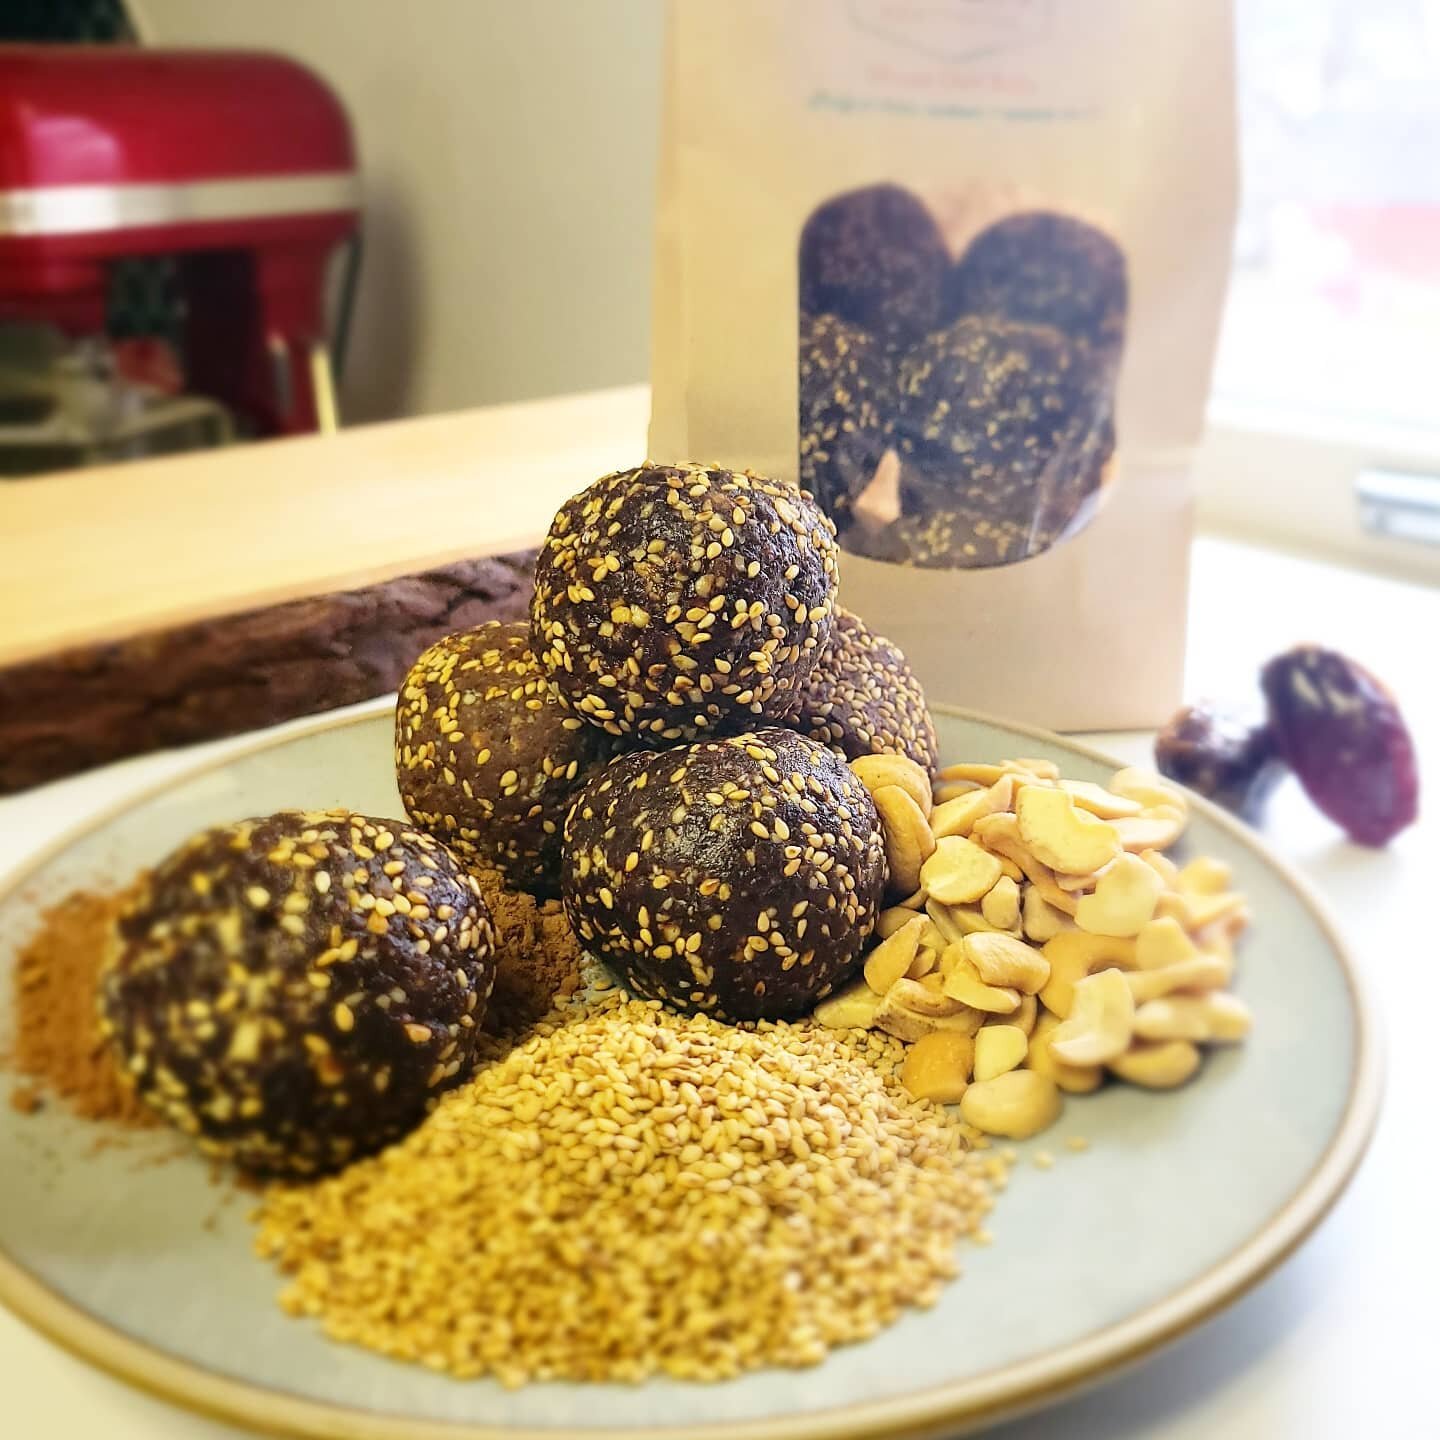 We've added to our treat selection!! &iexcl;Hola Mayan Date Balls!
.
These were made intentionally for the end of pregnancy as well as the immediate postpartum seasons.
.
Enjoying 2 of these deep chocolate + slightly spicy date balls a day will meet 